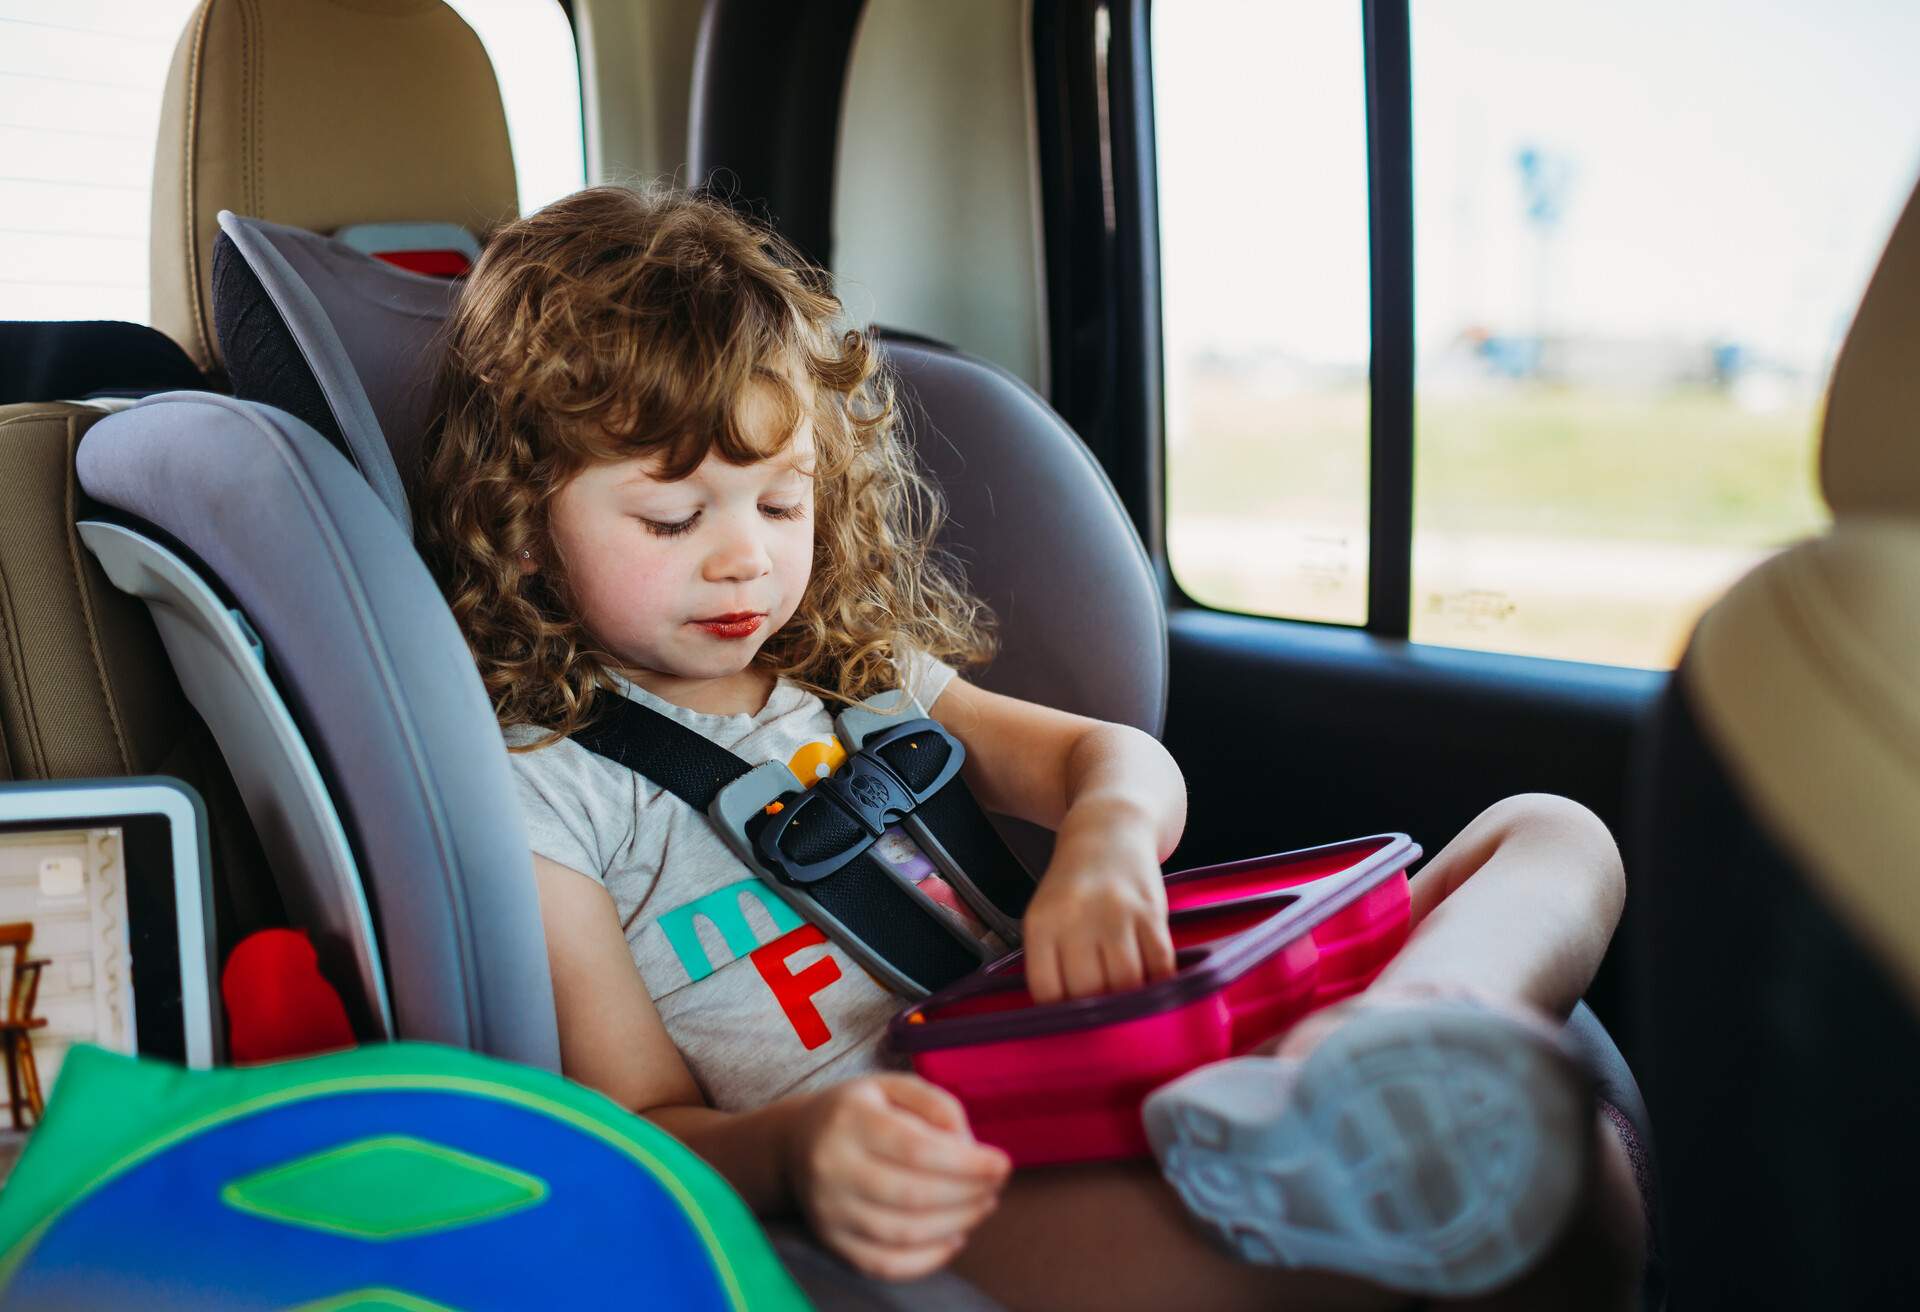 theme_car_child_seat_packed_lunch_roadtrip_gettyimages-1184834587_universal_within-usage-period_83059